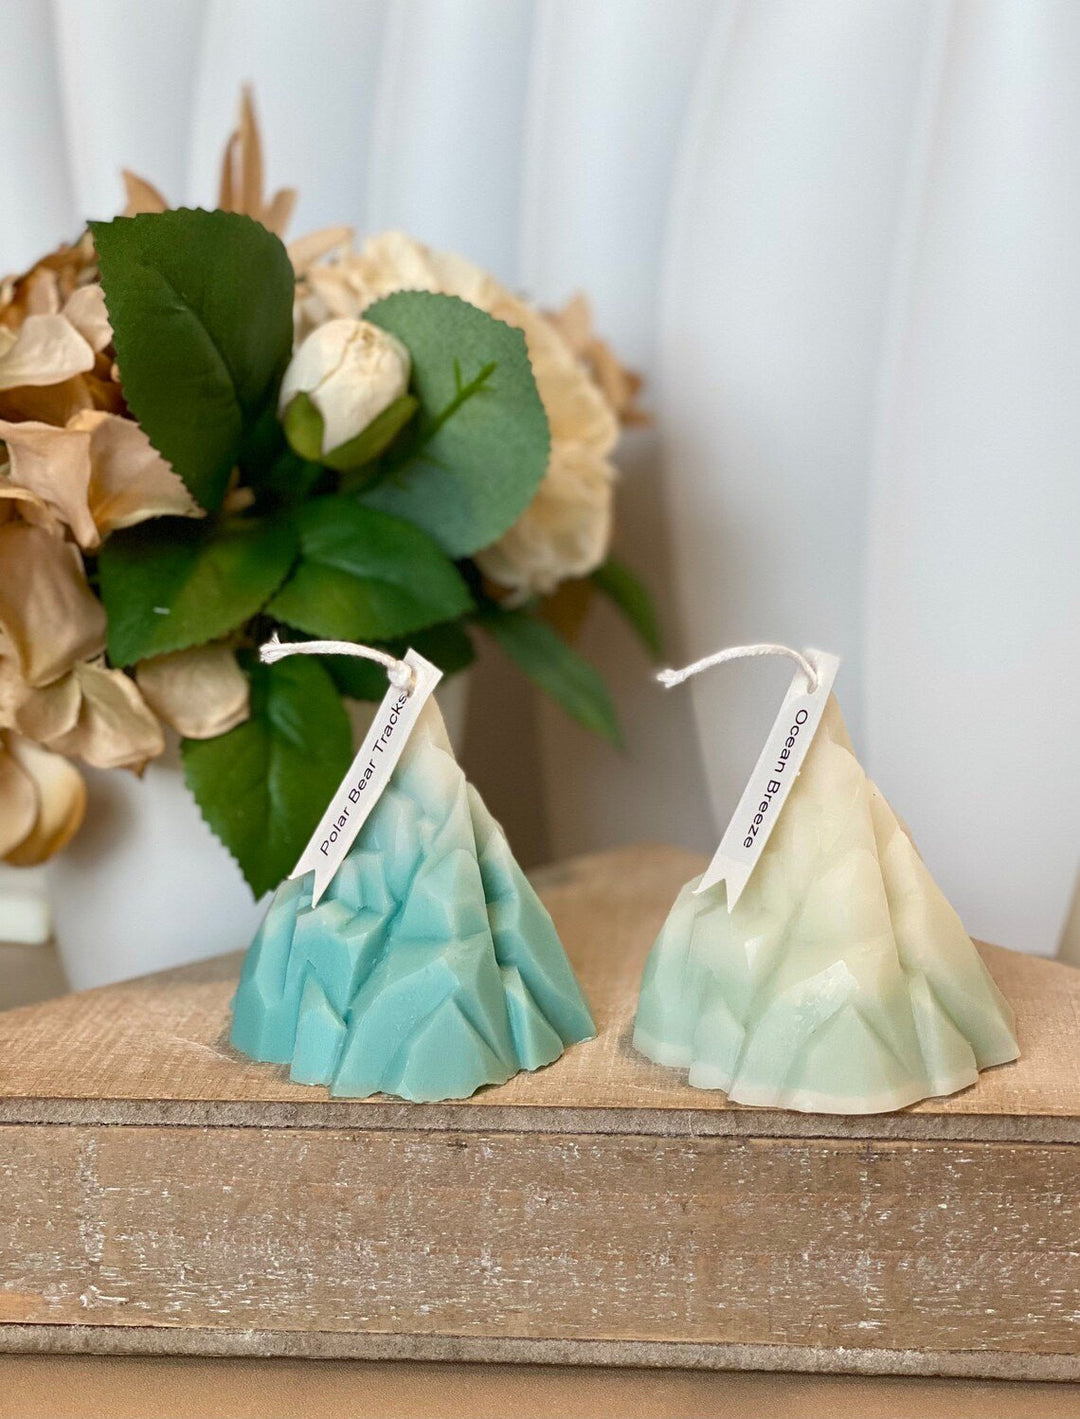 Iceberg Sculpture Candles • Handmade Soy Wax • Home Decor - Crazy About Candles